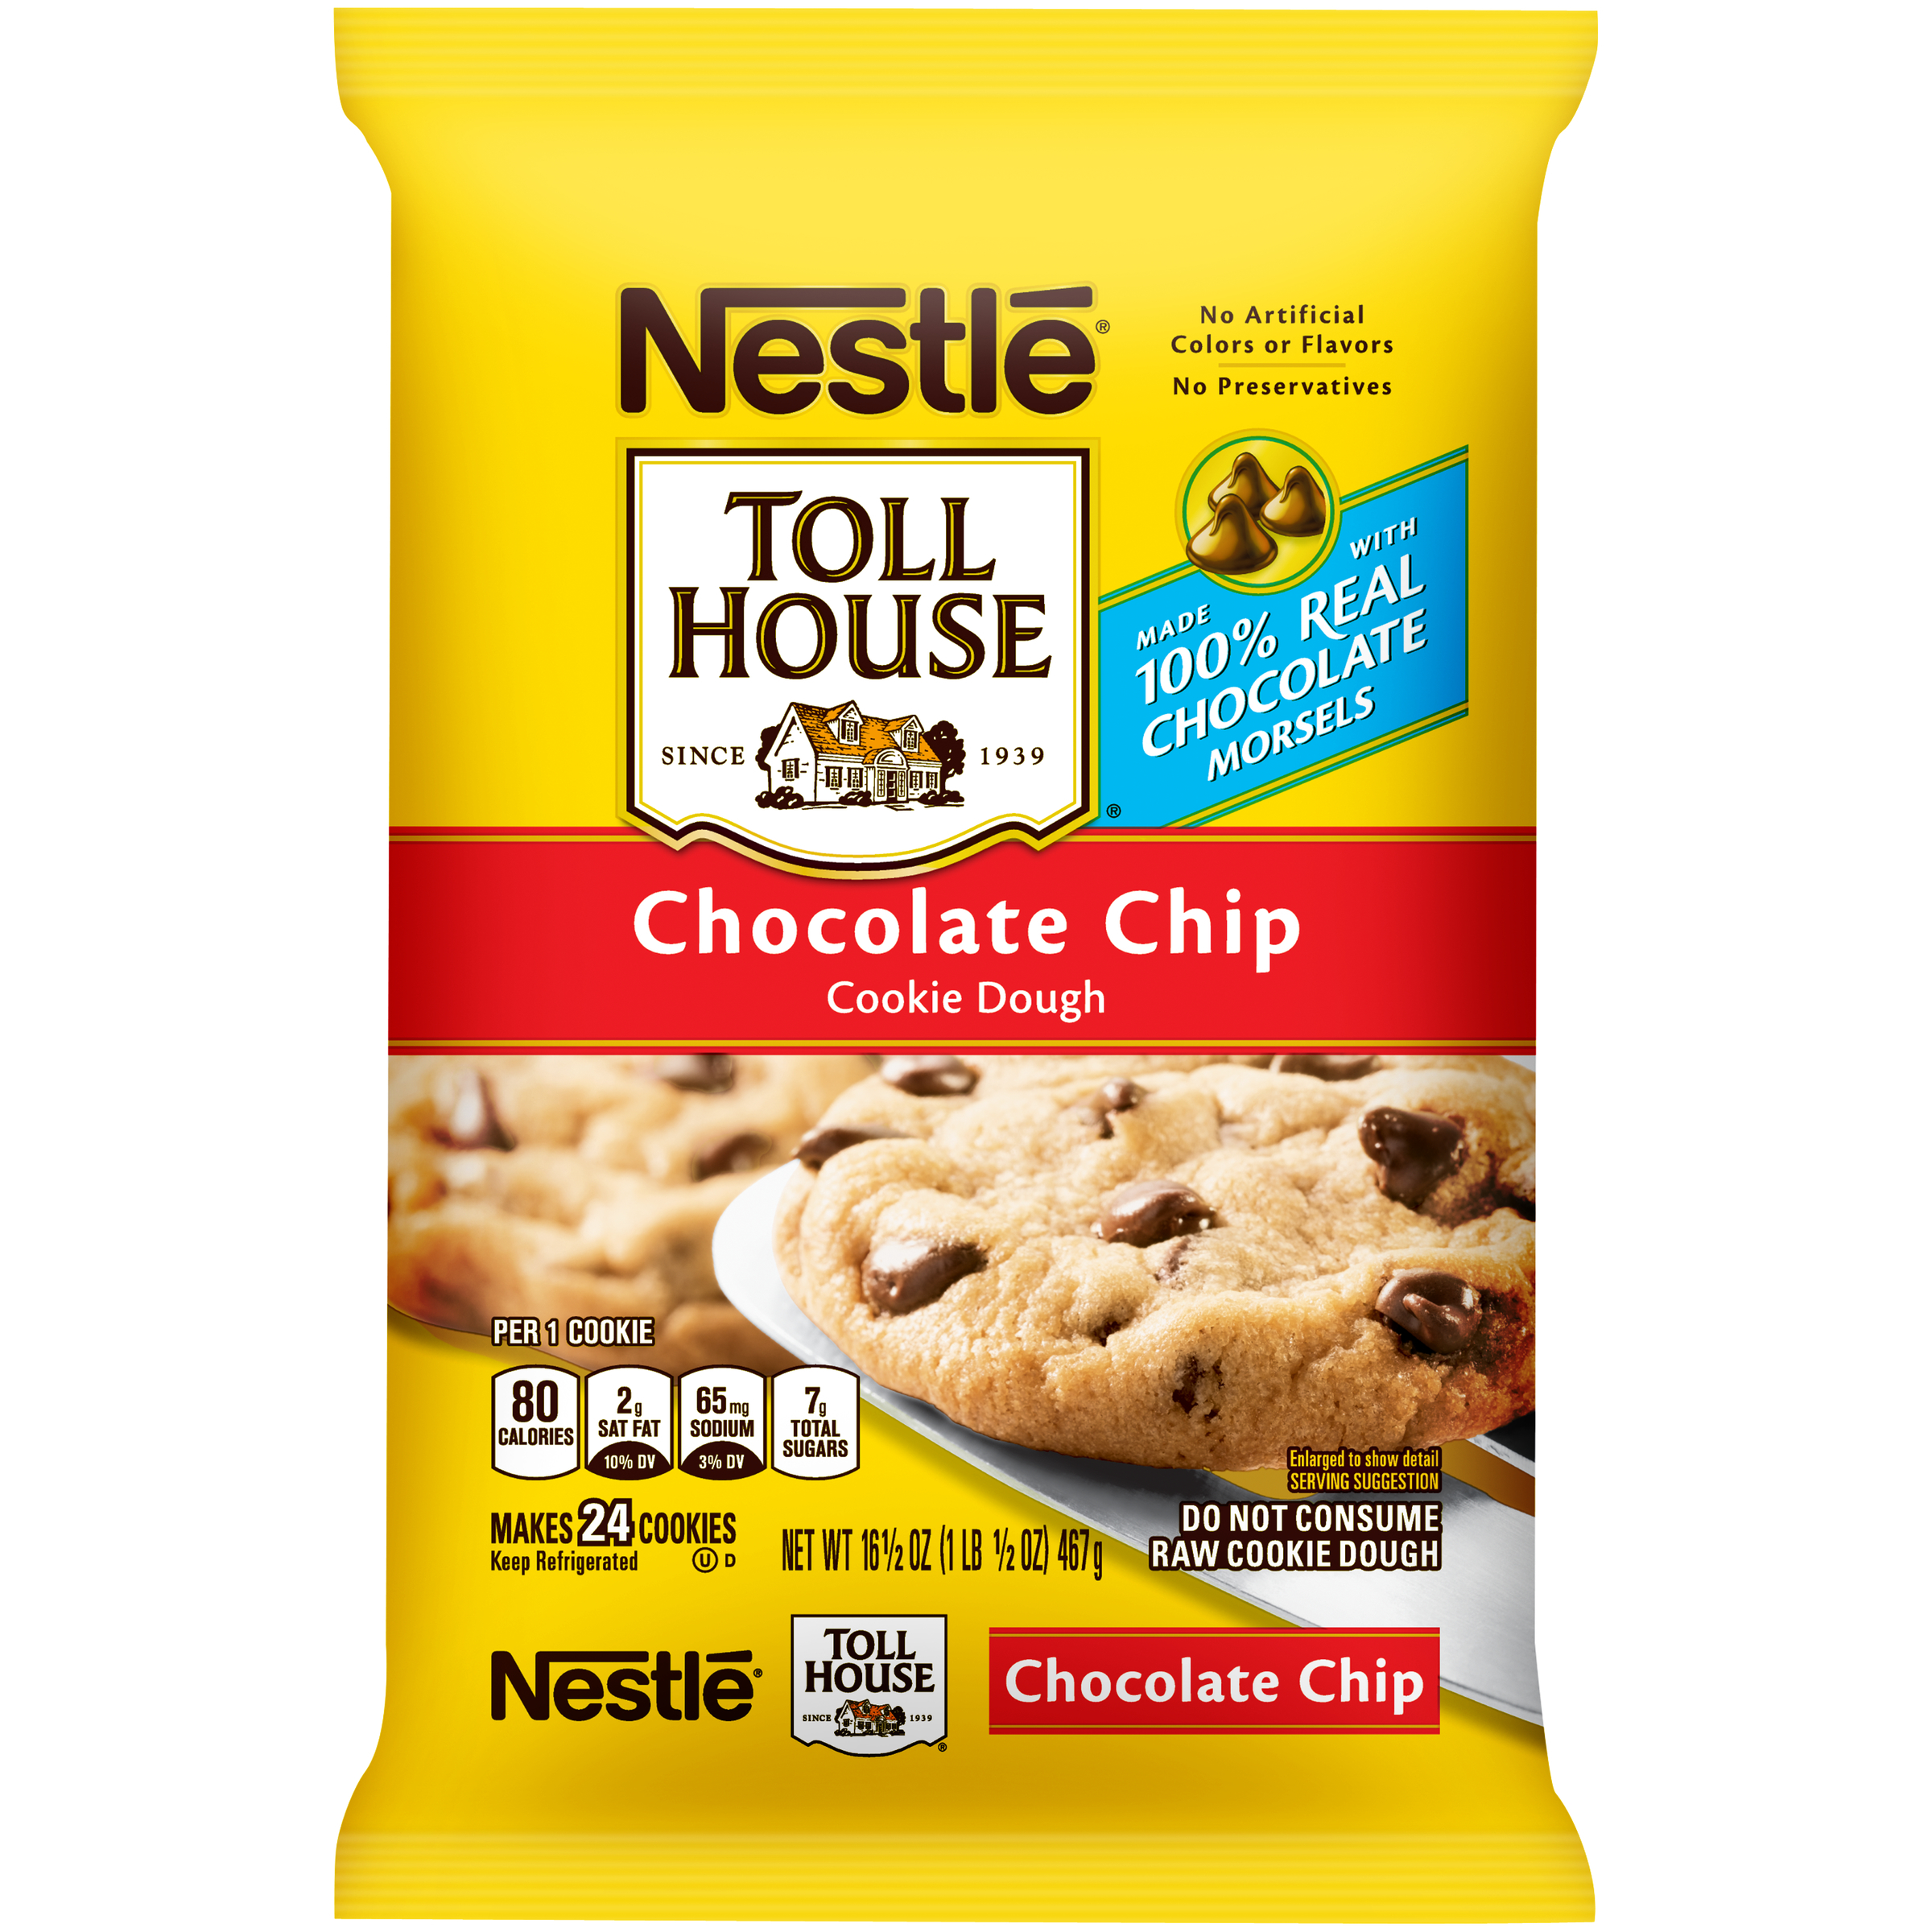 Nestle Toll House Cookie Dough, Chocolate Chip, 24 cookies [16.5 oz (1 lb 0.5 oz) 467 g]